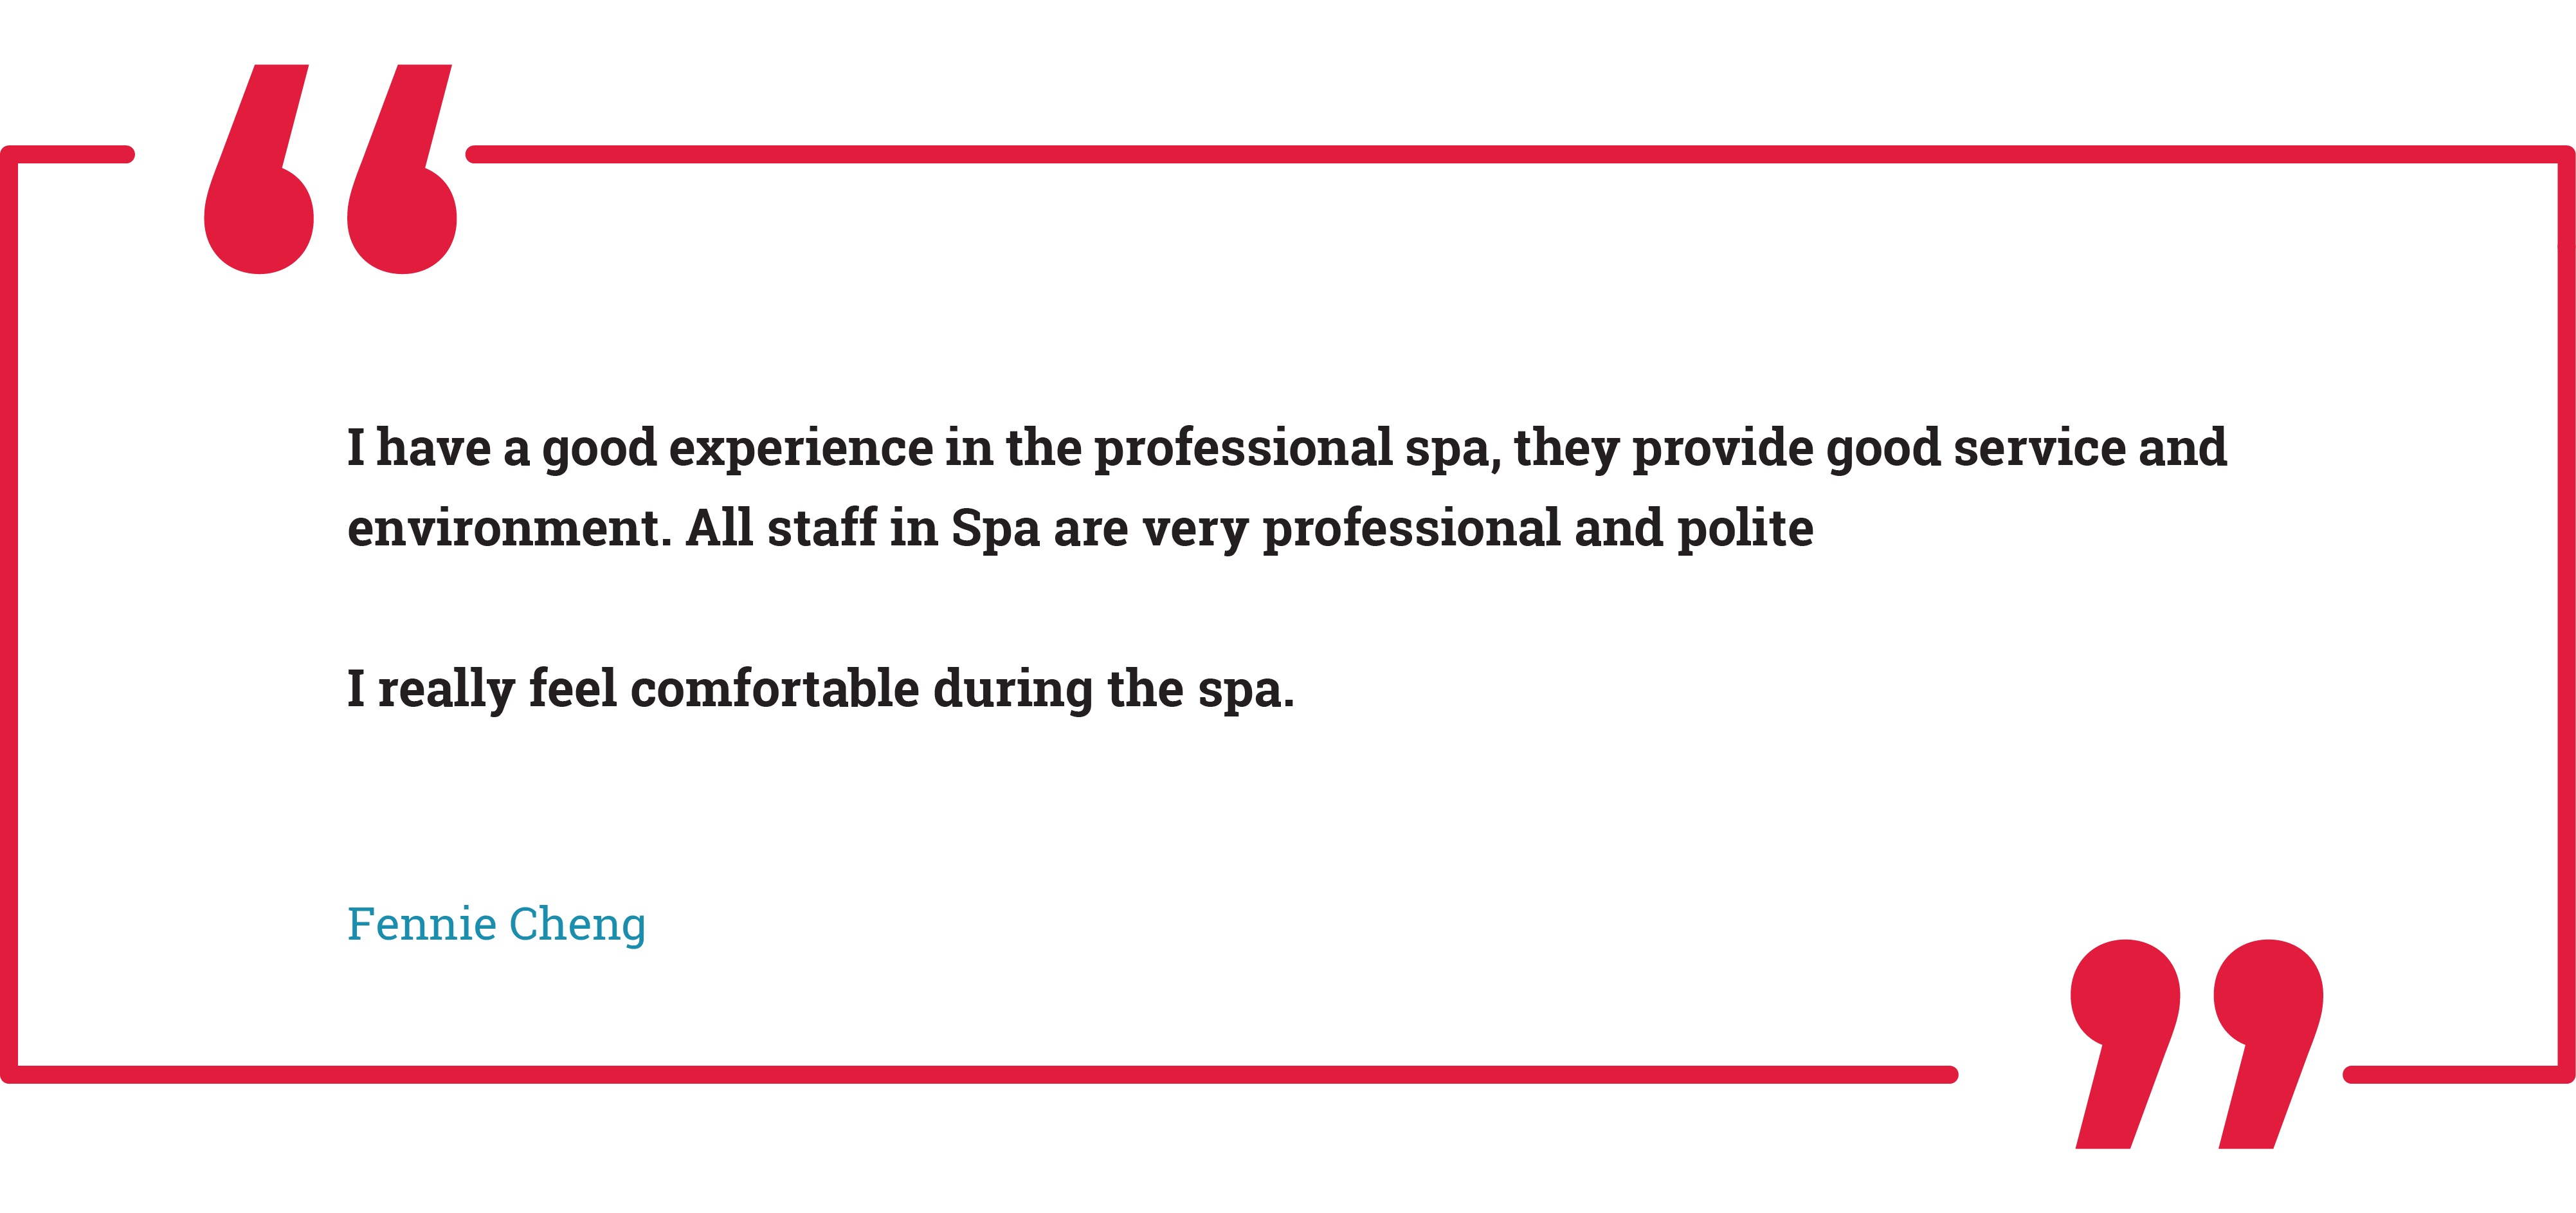 I have a good experience in the professional spa, they provide good service and environment. All staff in Spa are very professional and polite. I really feel comfortable during the spa.